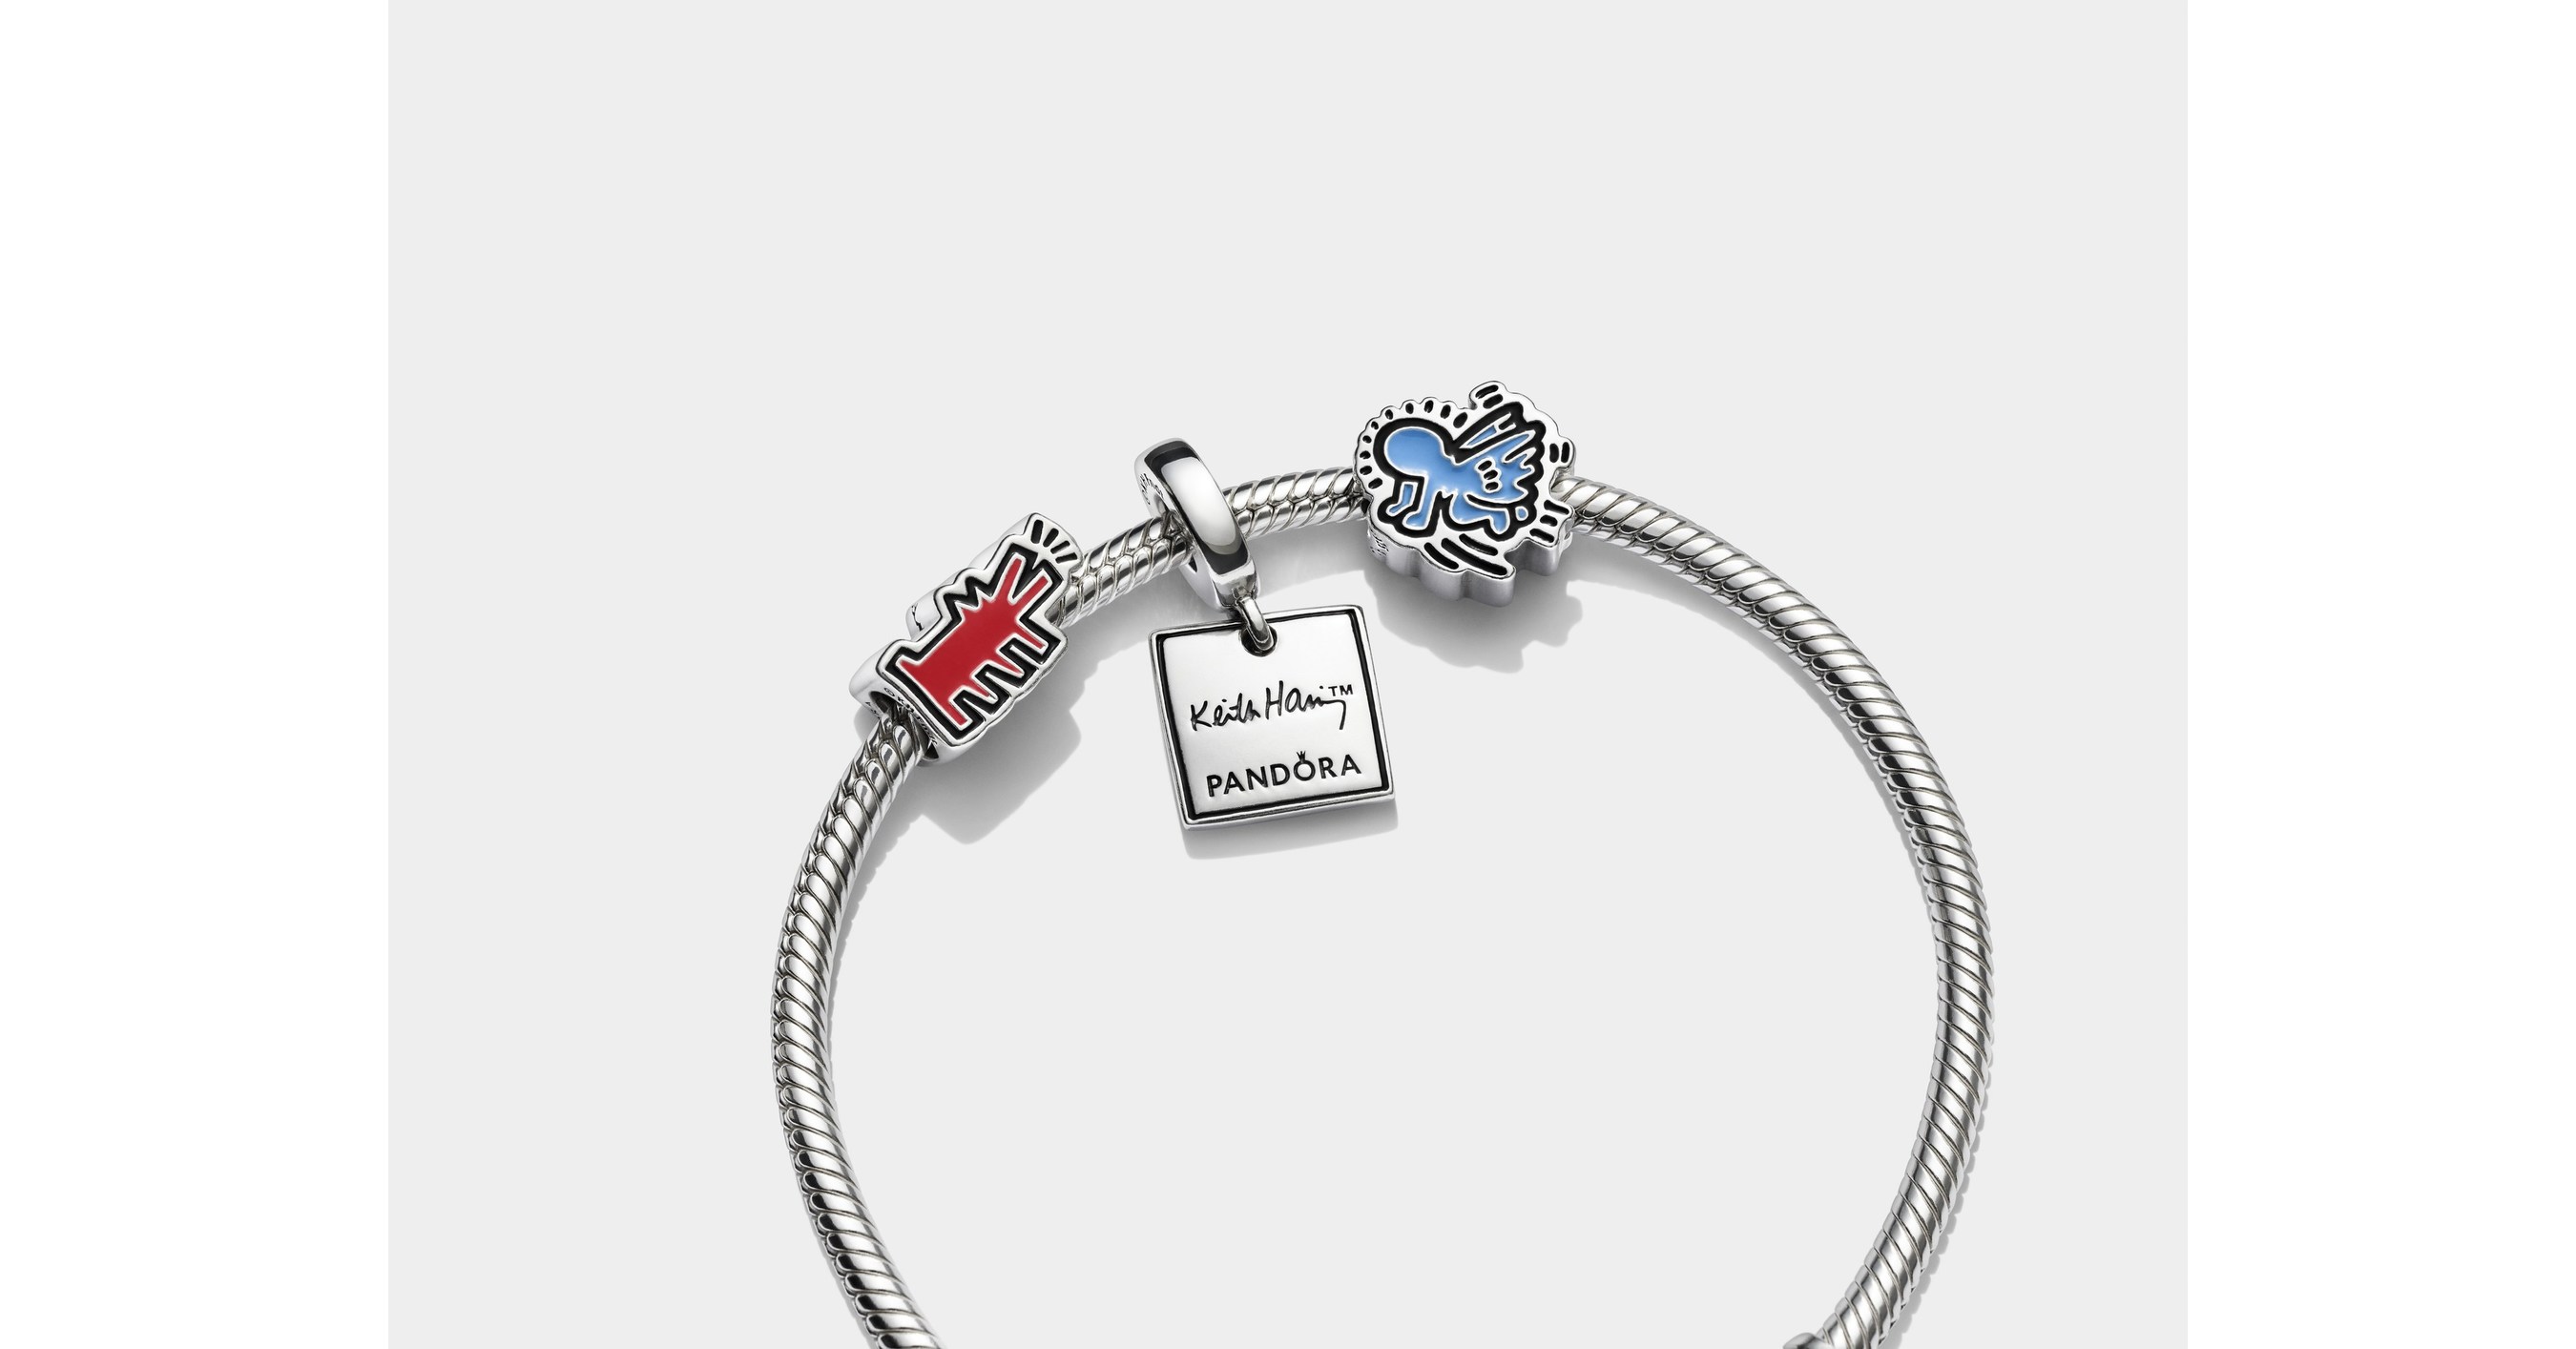 unveils its first ever art collaboration - Keith Haring X Pandora